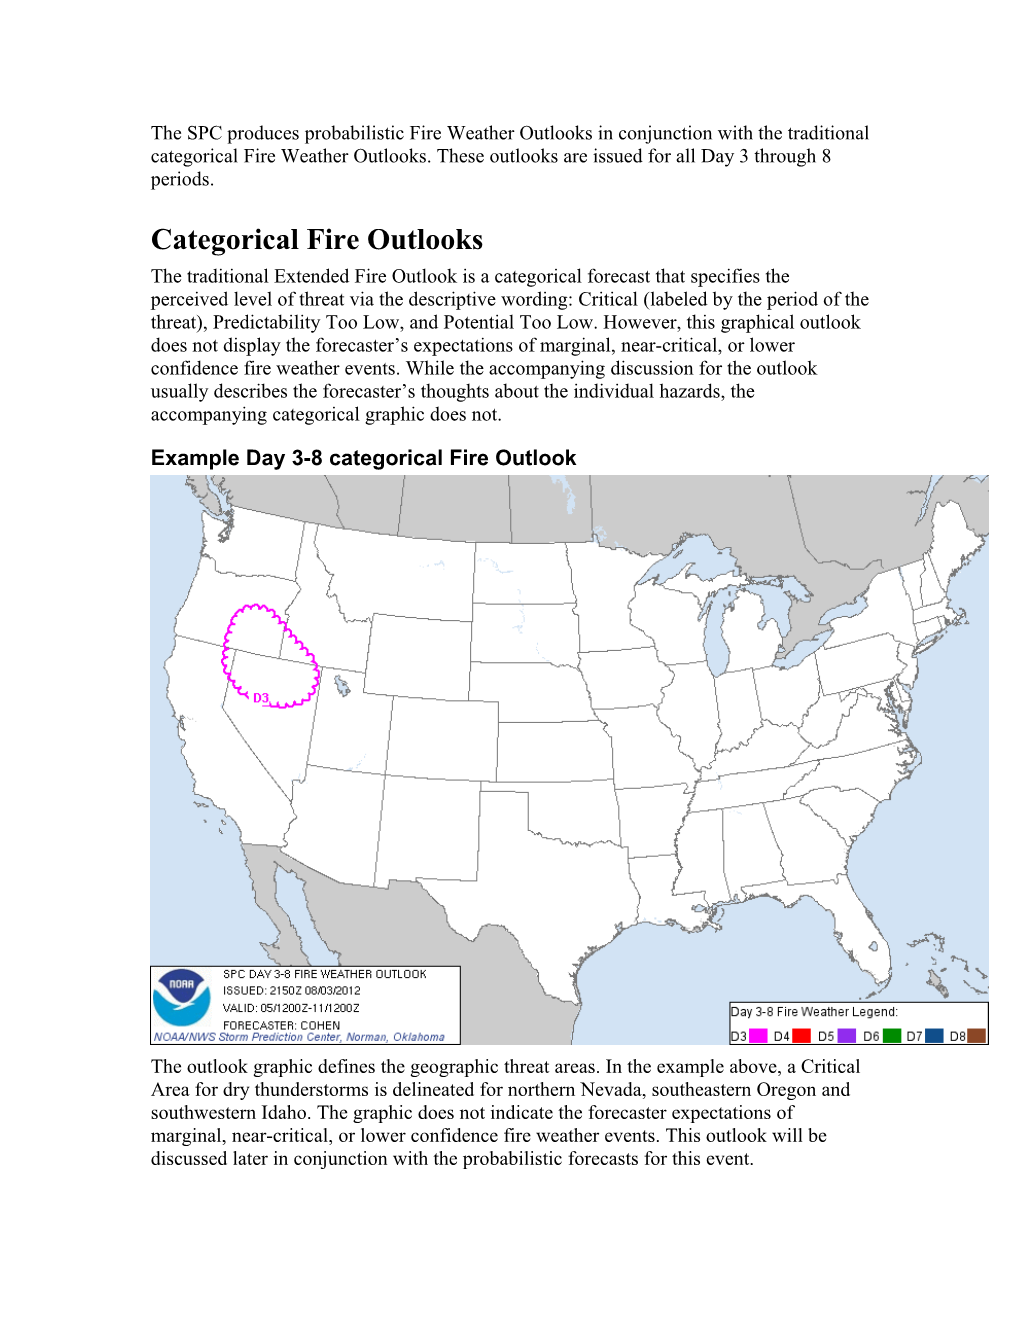 The SPC Produces Probabilistic Fire Weather Outlooks in Conjunction with the Traditional